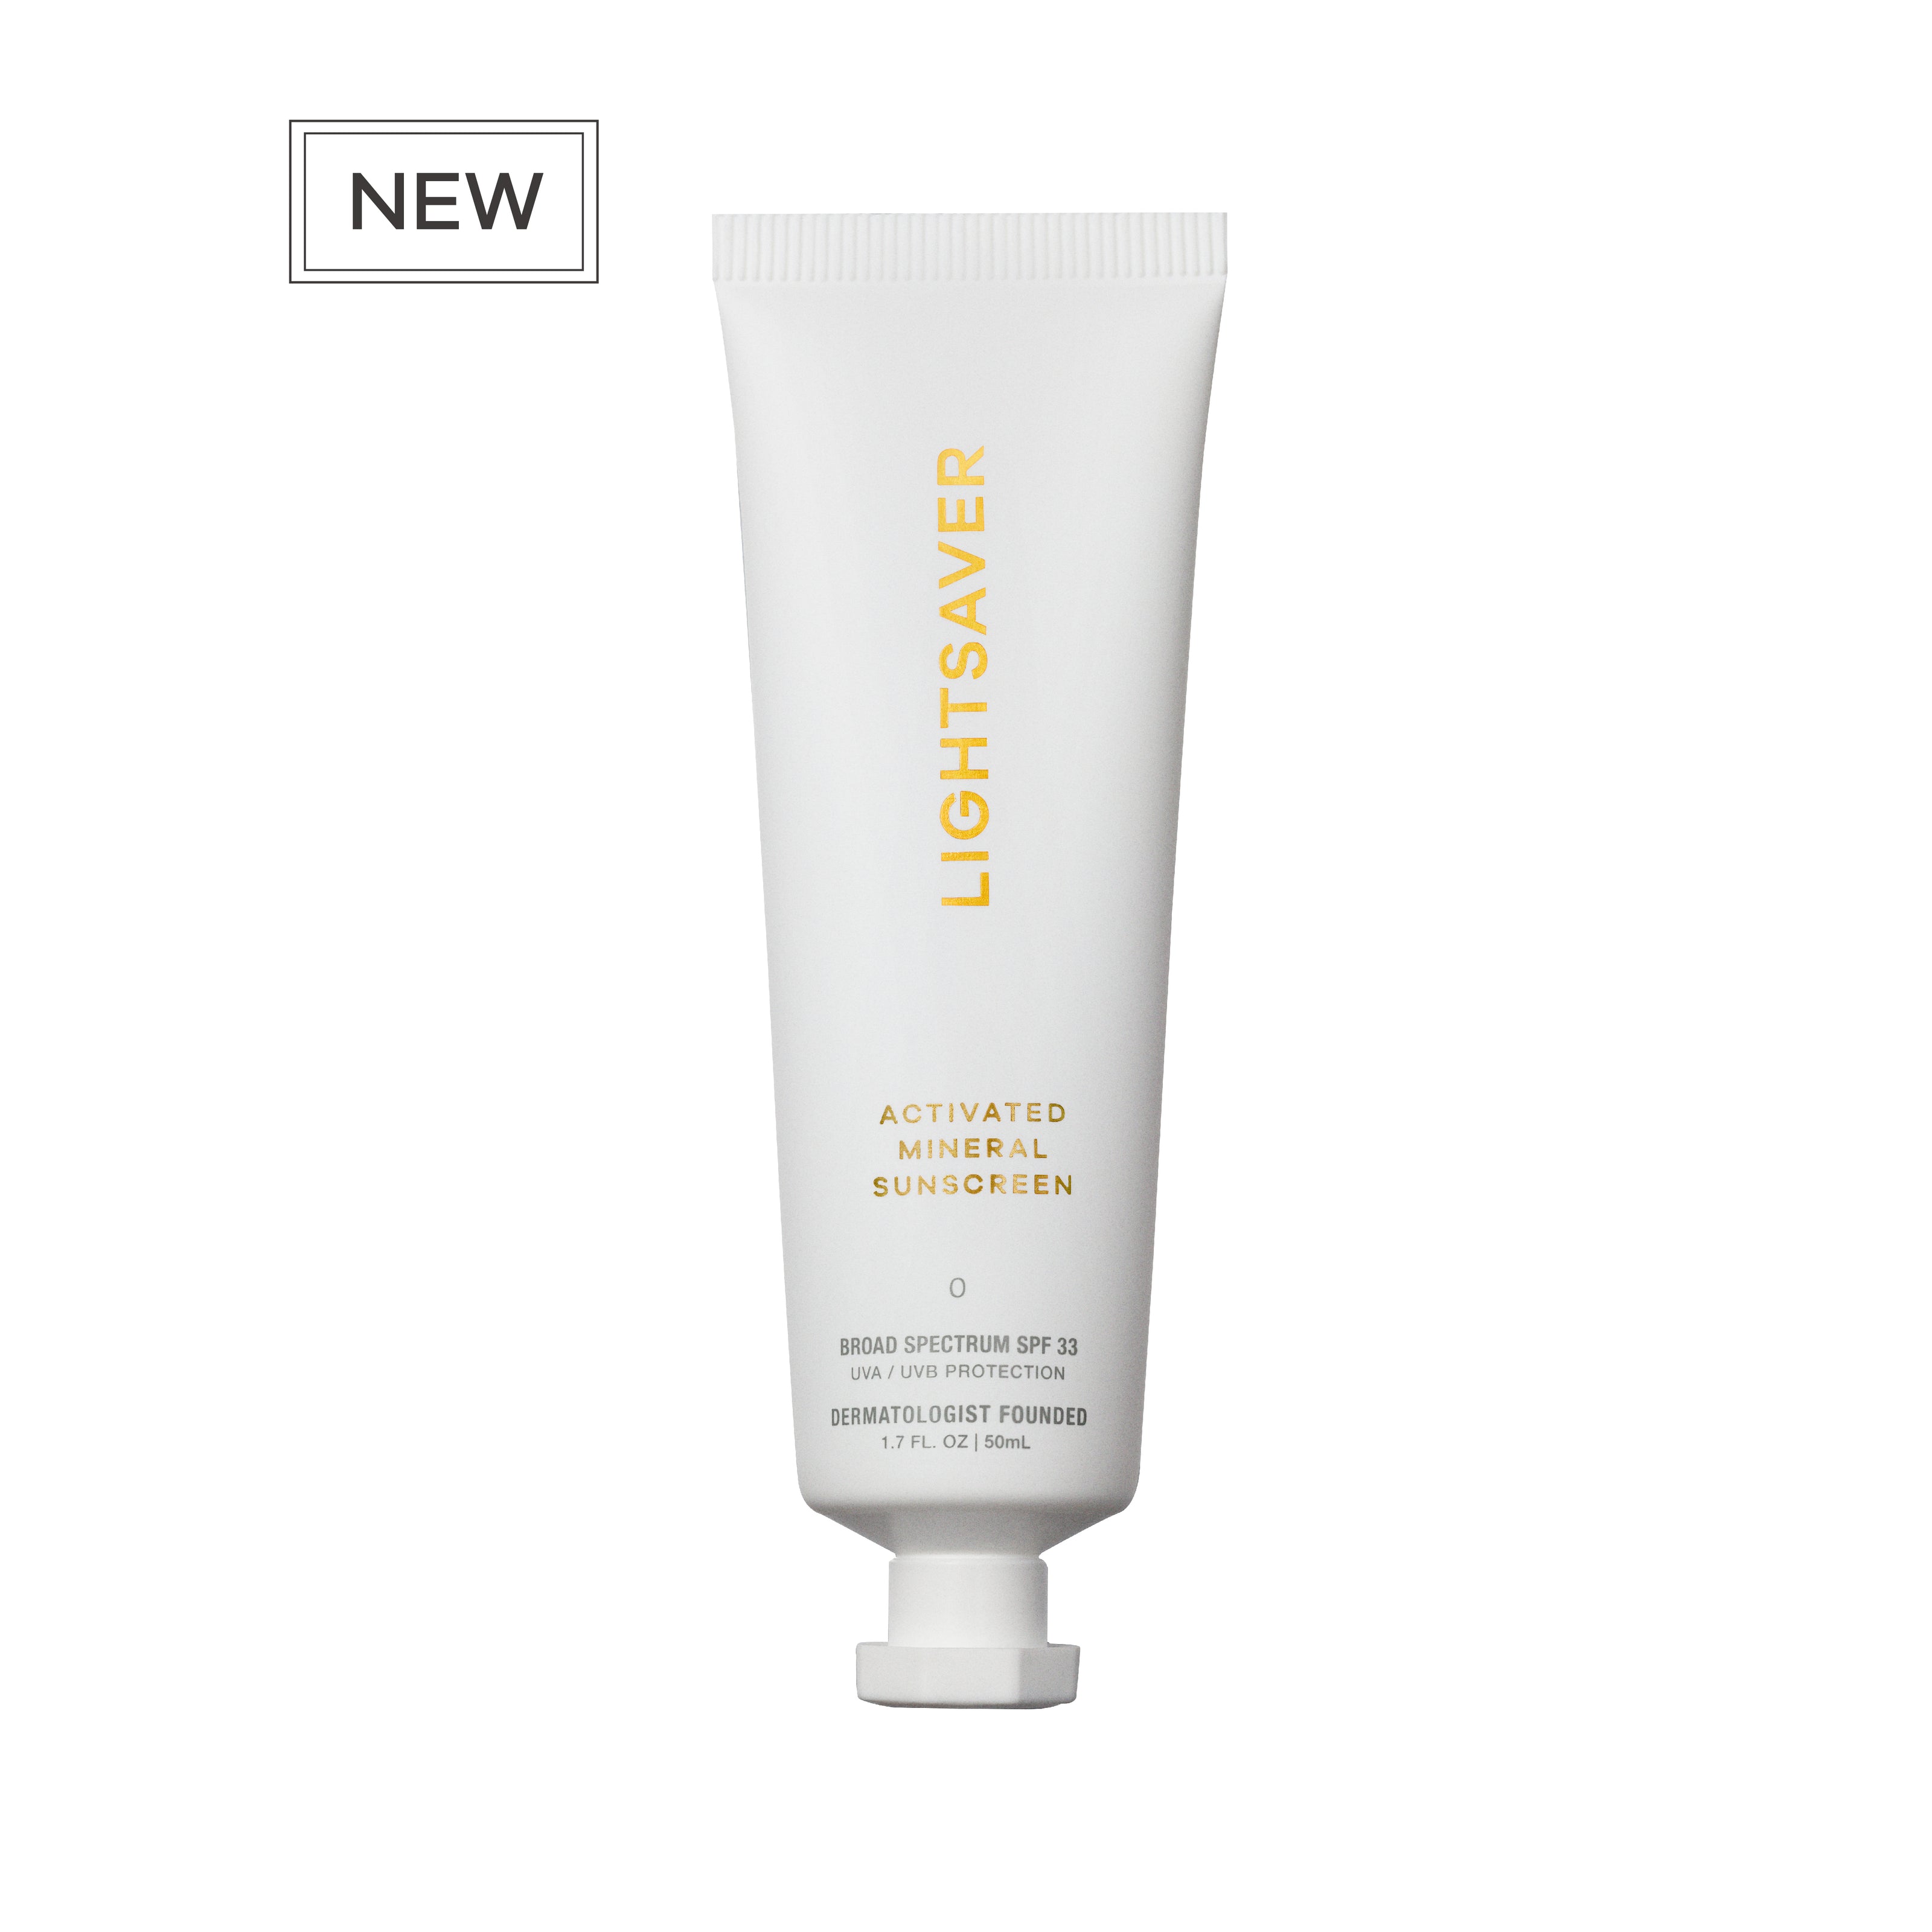 Activated Mineral Sunscreen (SPF 33) - Shade 0